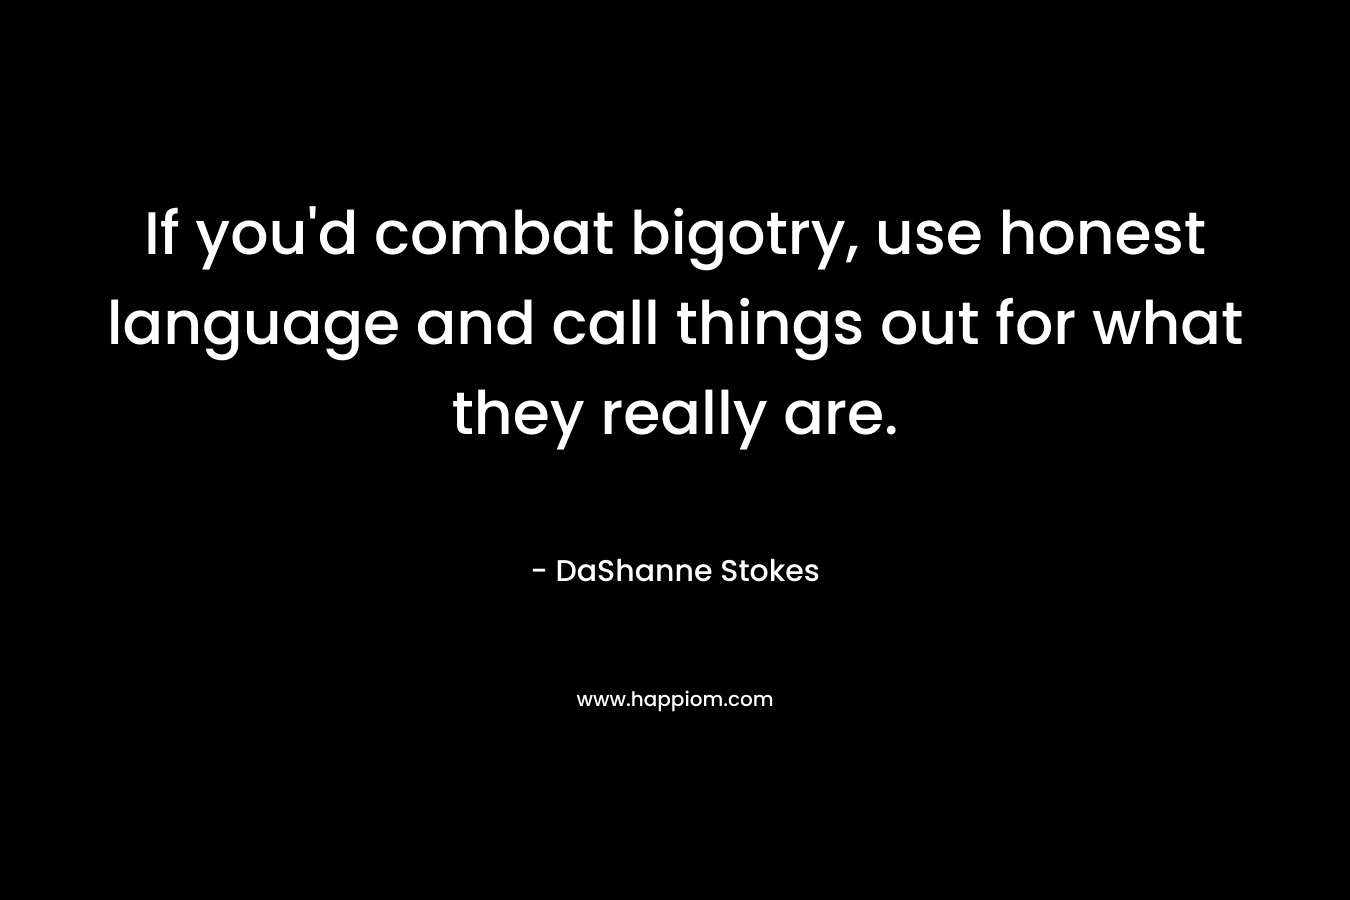 If you'd combat bigotry, use honest language and call things out for what they really are.